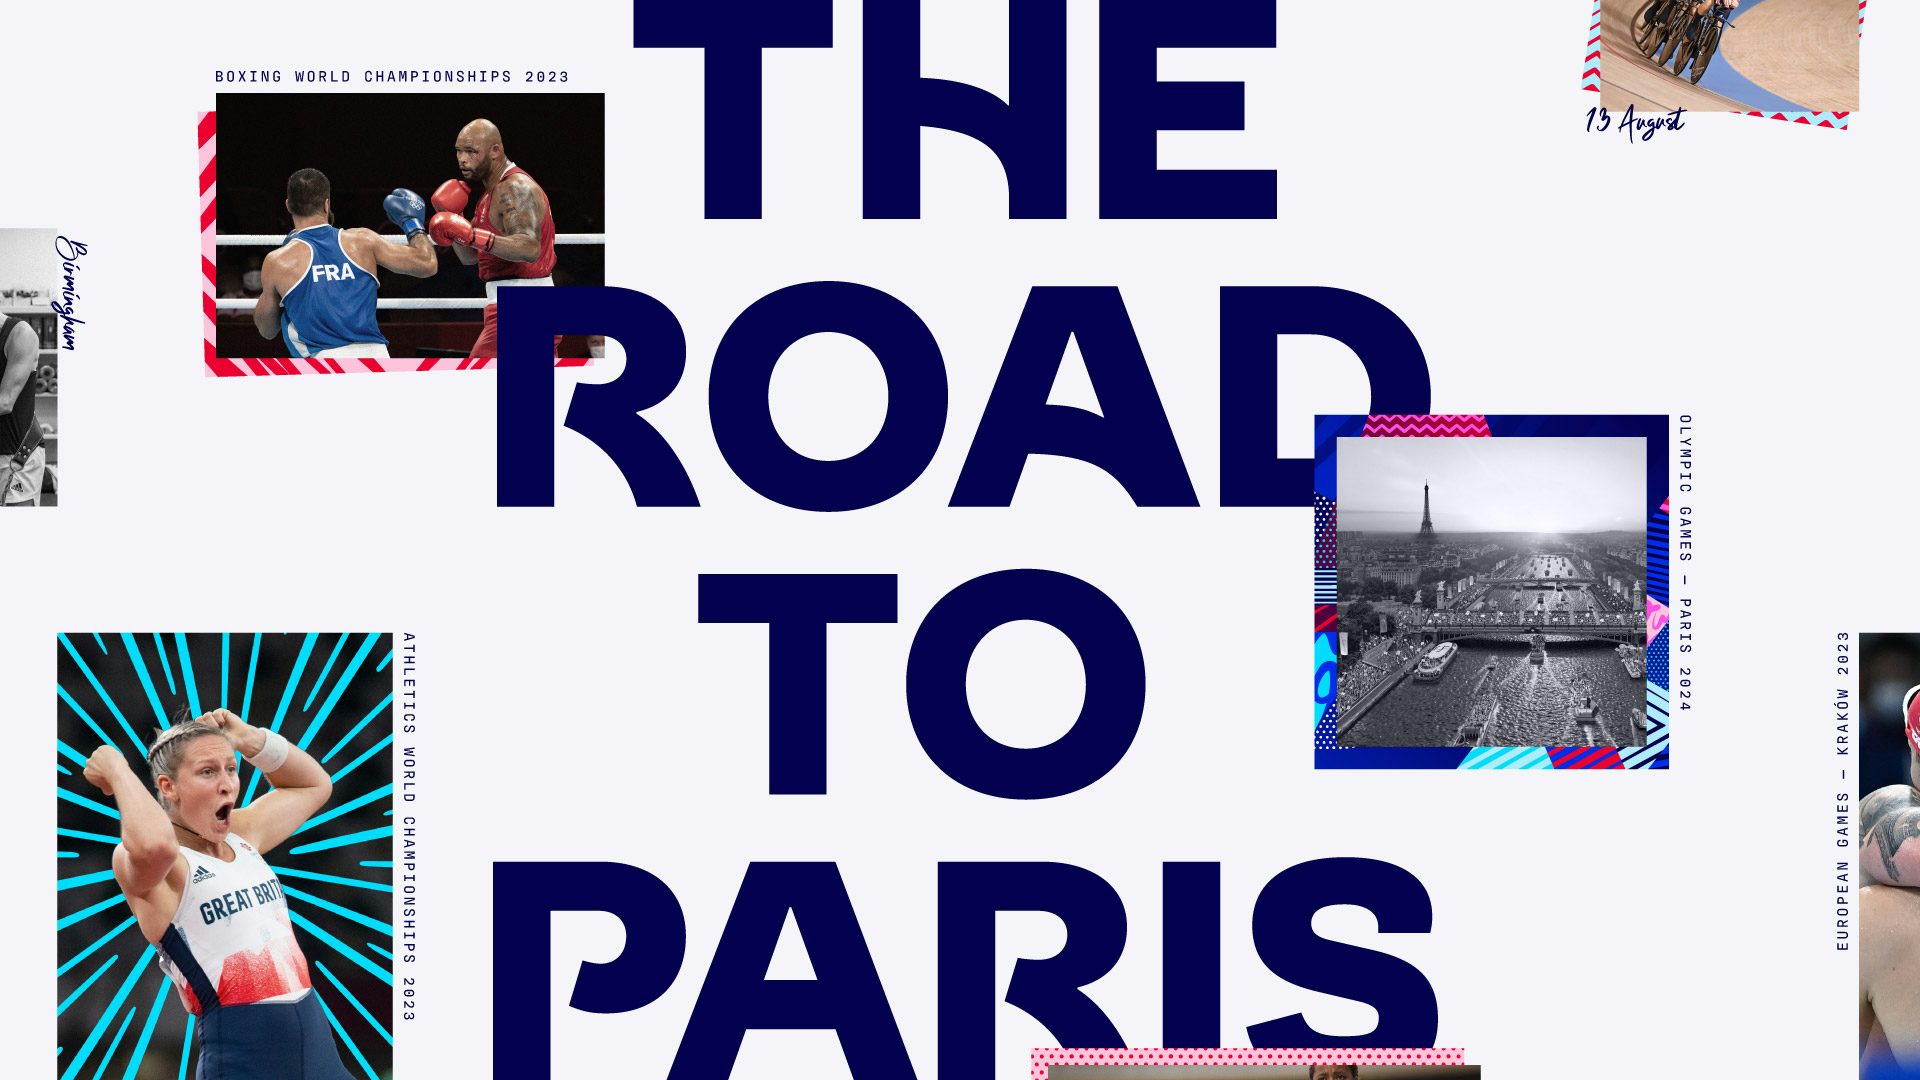 Graphic featuring the Team GB rebrand, headlined 'The road to Paris' laid out in a blocky typeface where straight lines in letterforms have been turned into curves. The graphic features images of an athlete, a boxing match, a black and white photo of the Seine with the Eiffel Tower in the background